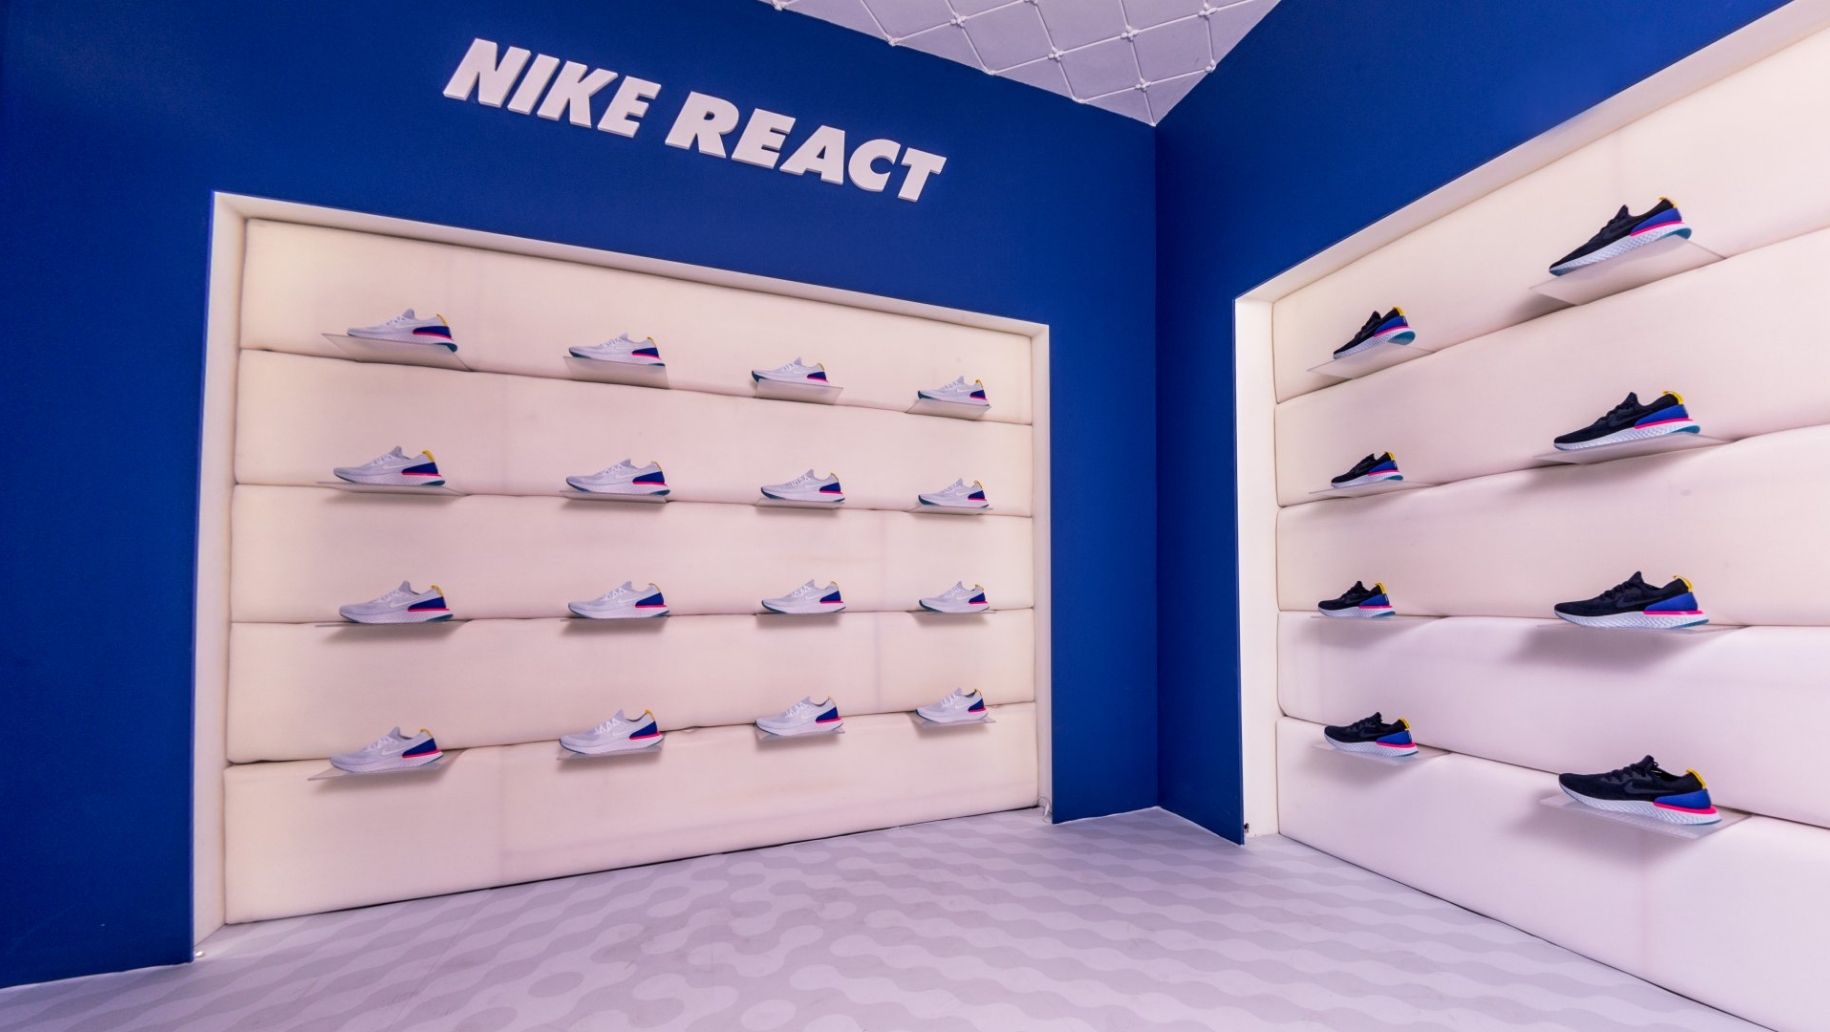 Installation walls where one displays rows of white colorway Nike React sneaker. Second wall displays rows of Blue Nike React colorway.